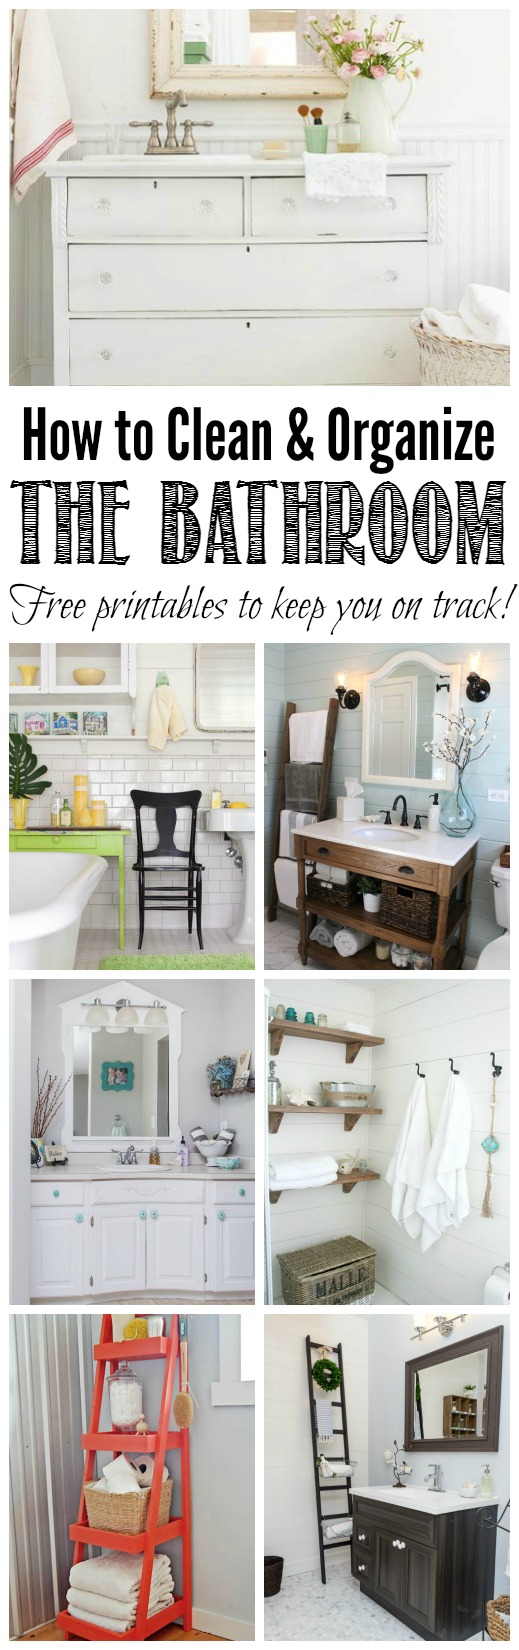 https://www.cleanandscentsible.com/wp-content/uploads/2015/04/How-to-Clean-and-Organize-the-Bathroom.jpg